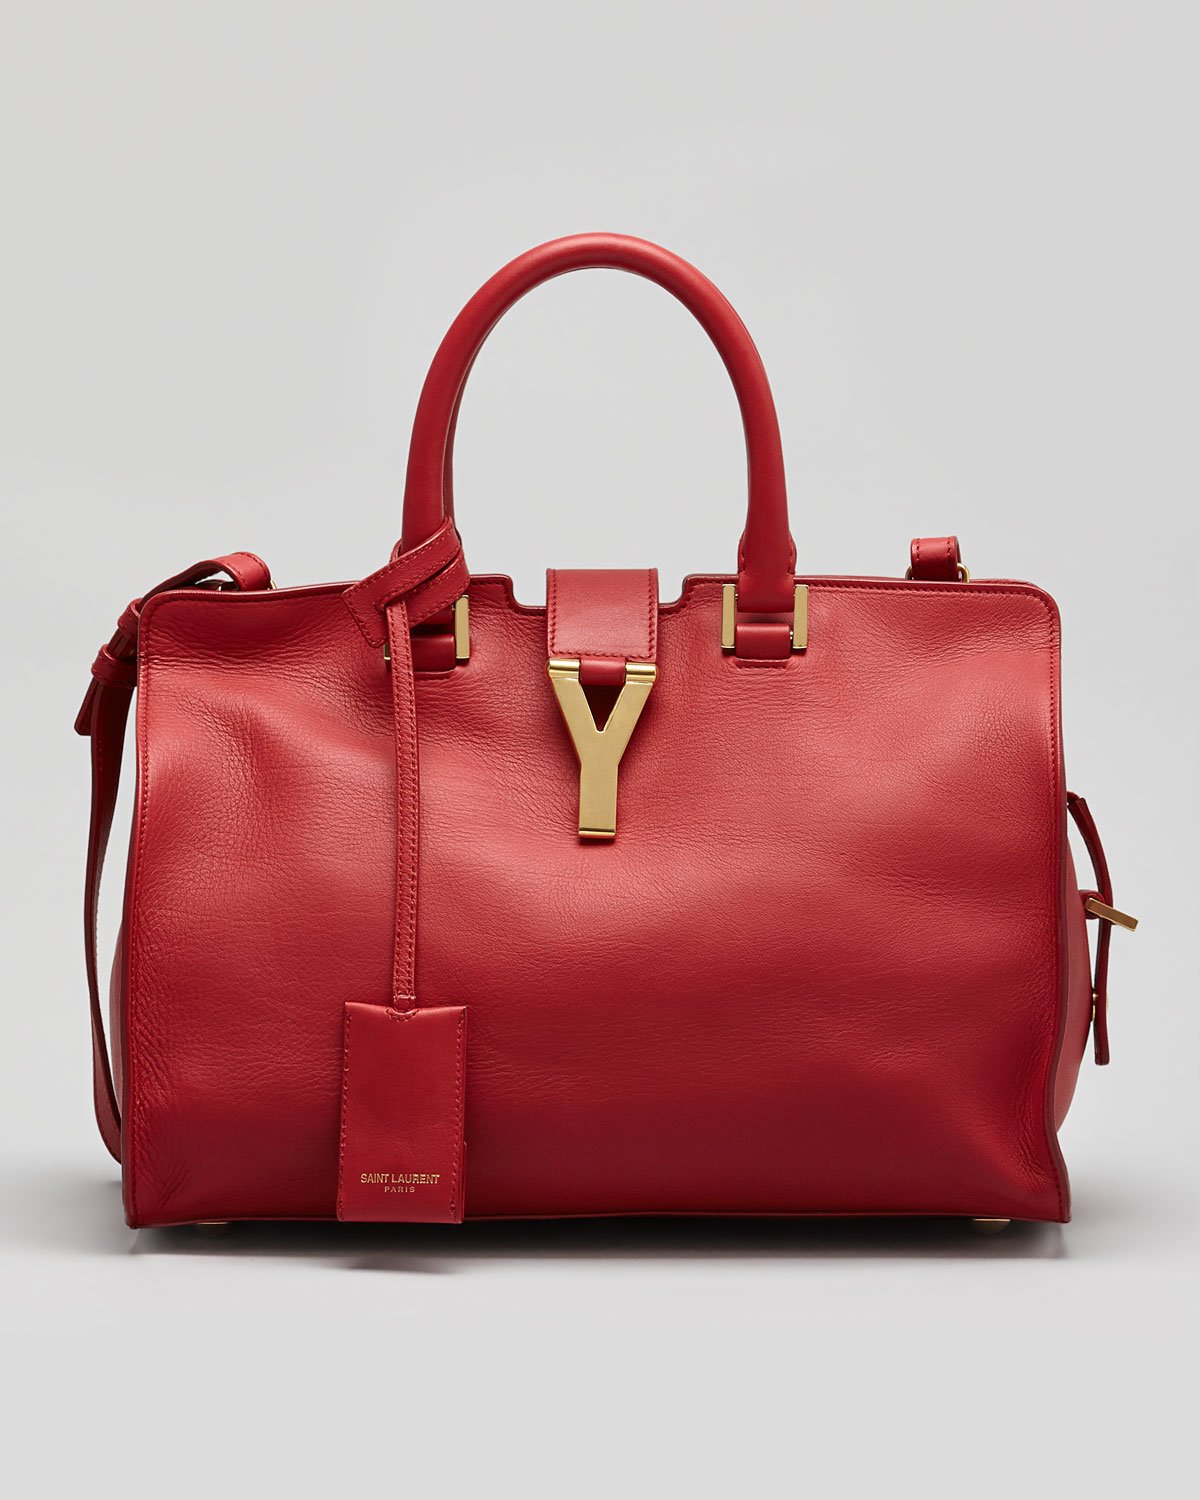 Saint laurent Y-Ligne Cabas Mini Leather Bag Red in Red | Lyst